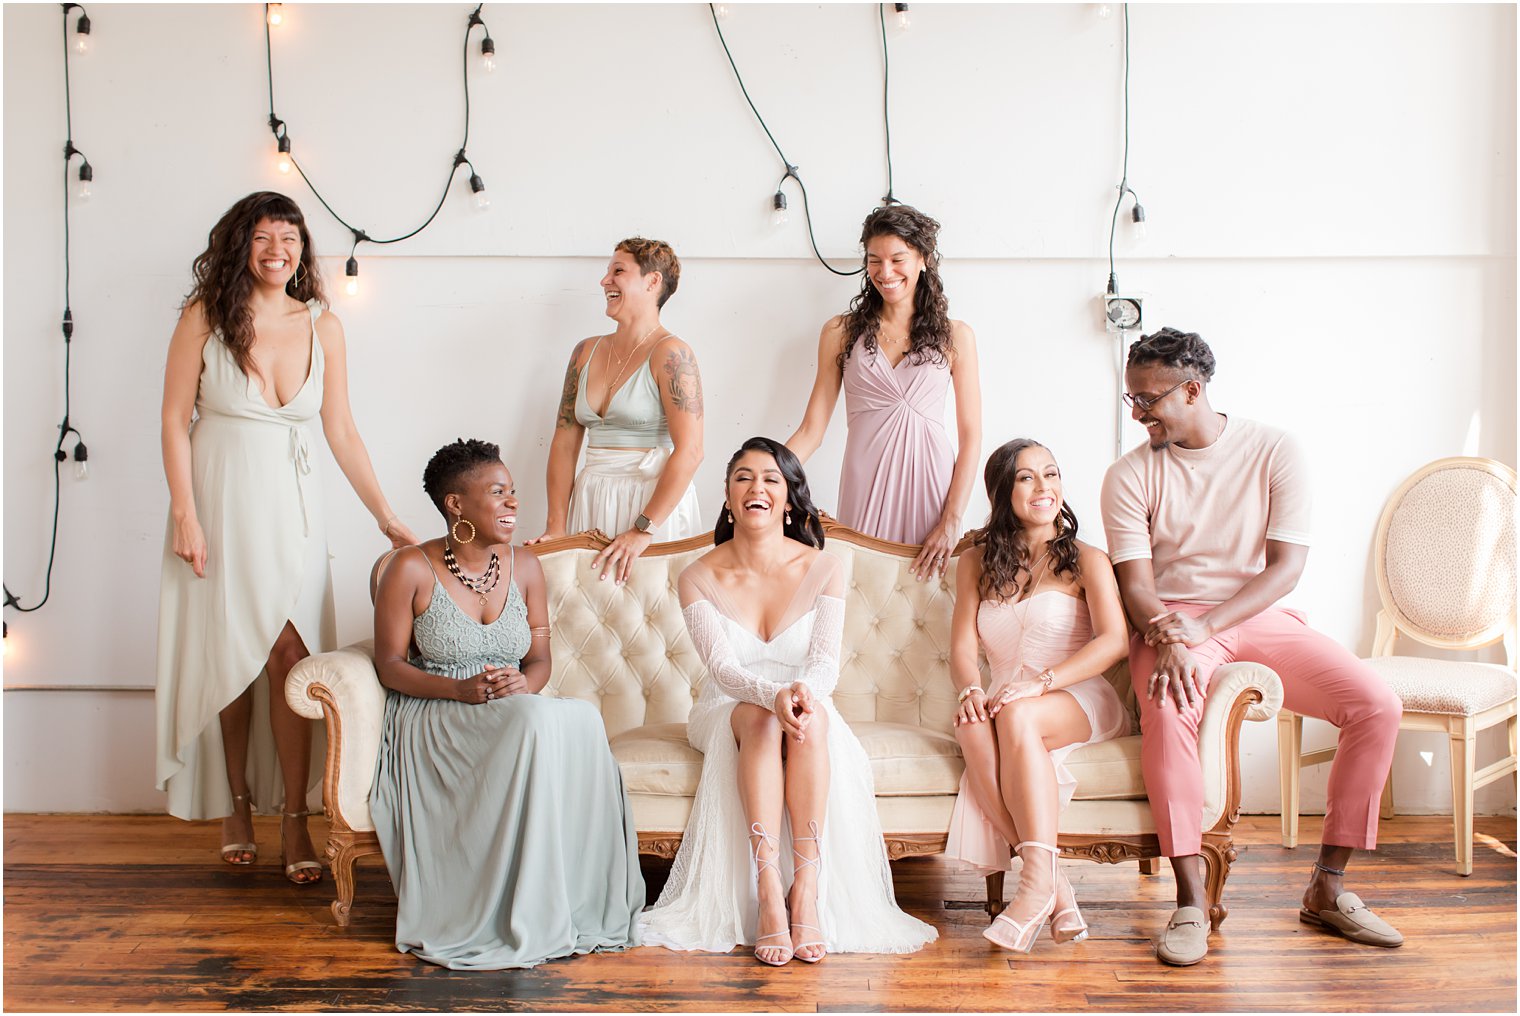 Bridal party wearing mismatched dresses